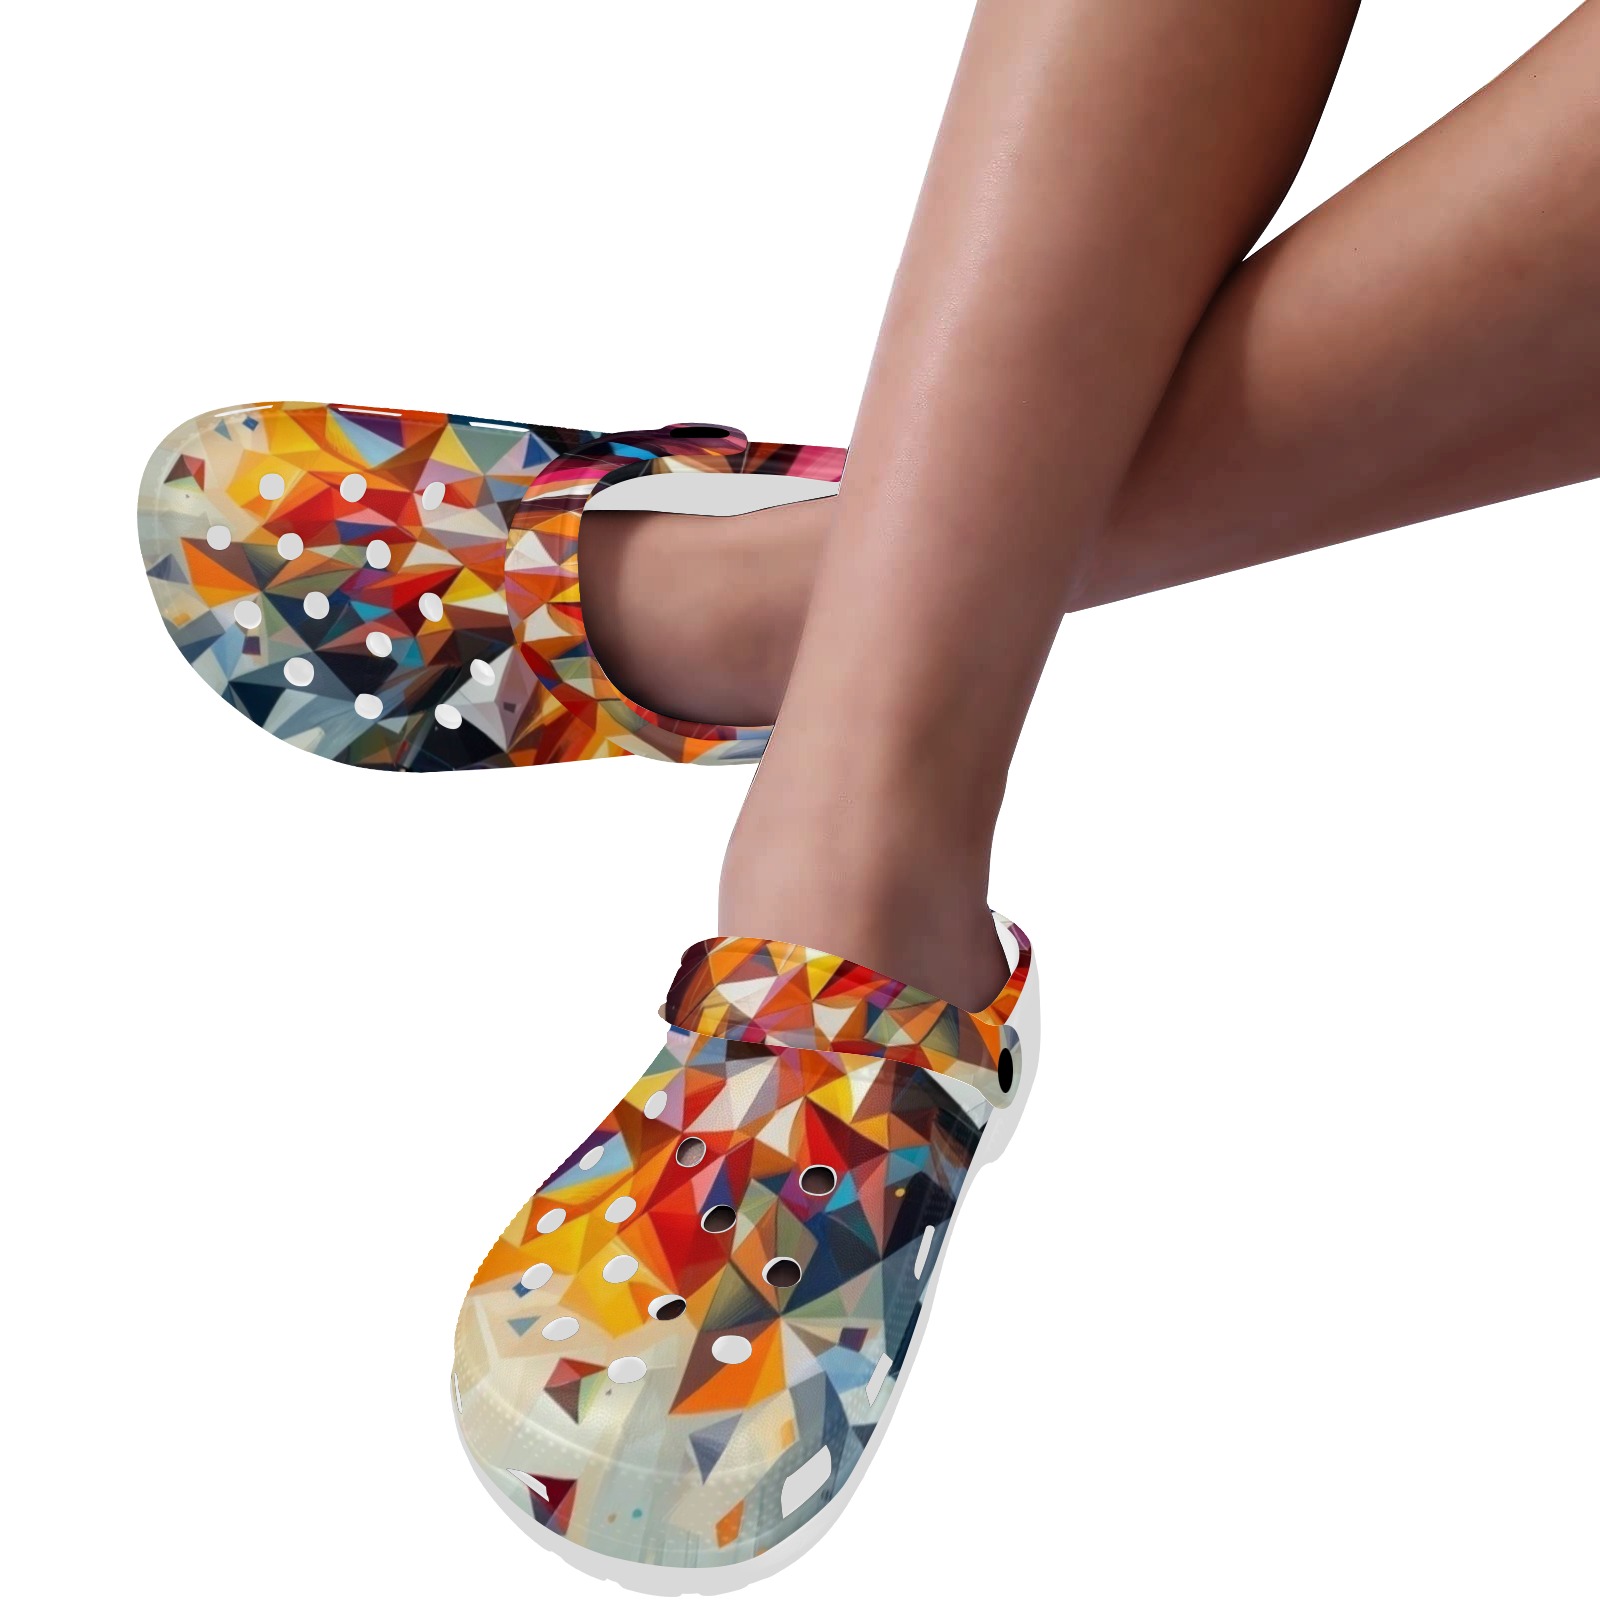 The Strappy Comfort: Women's Cross-Strap Sandals Custom Print Foam Clogs for Adults